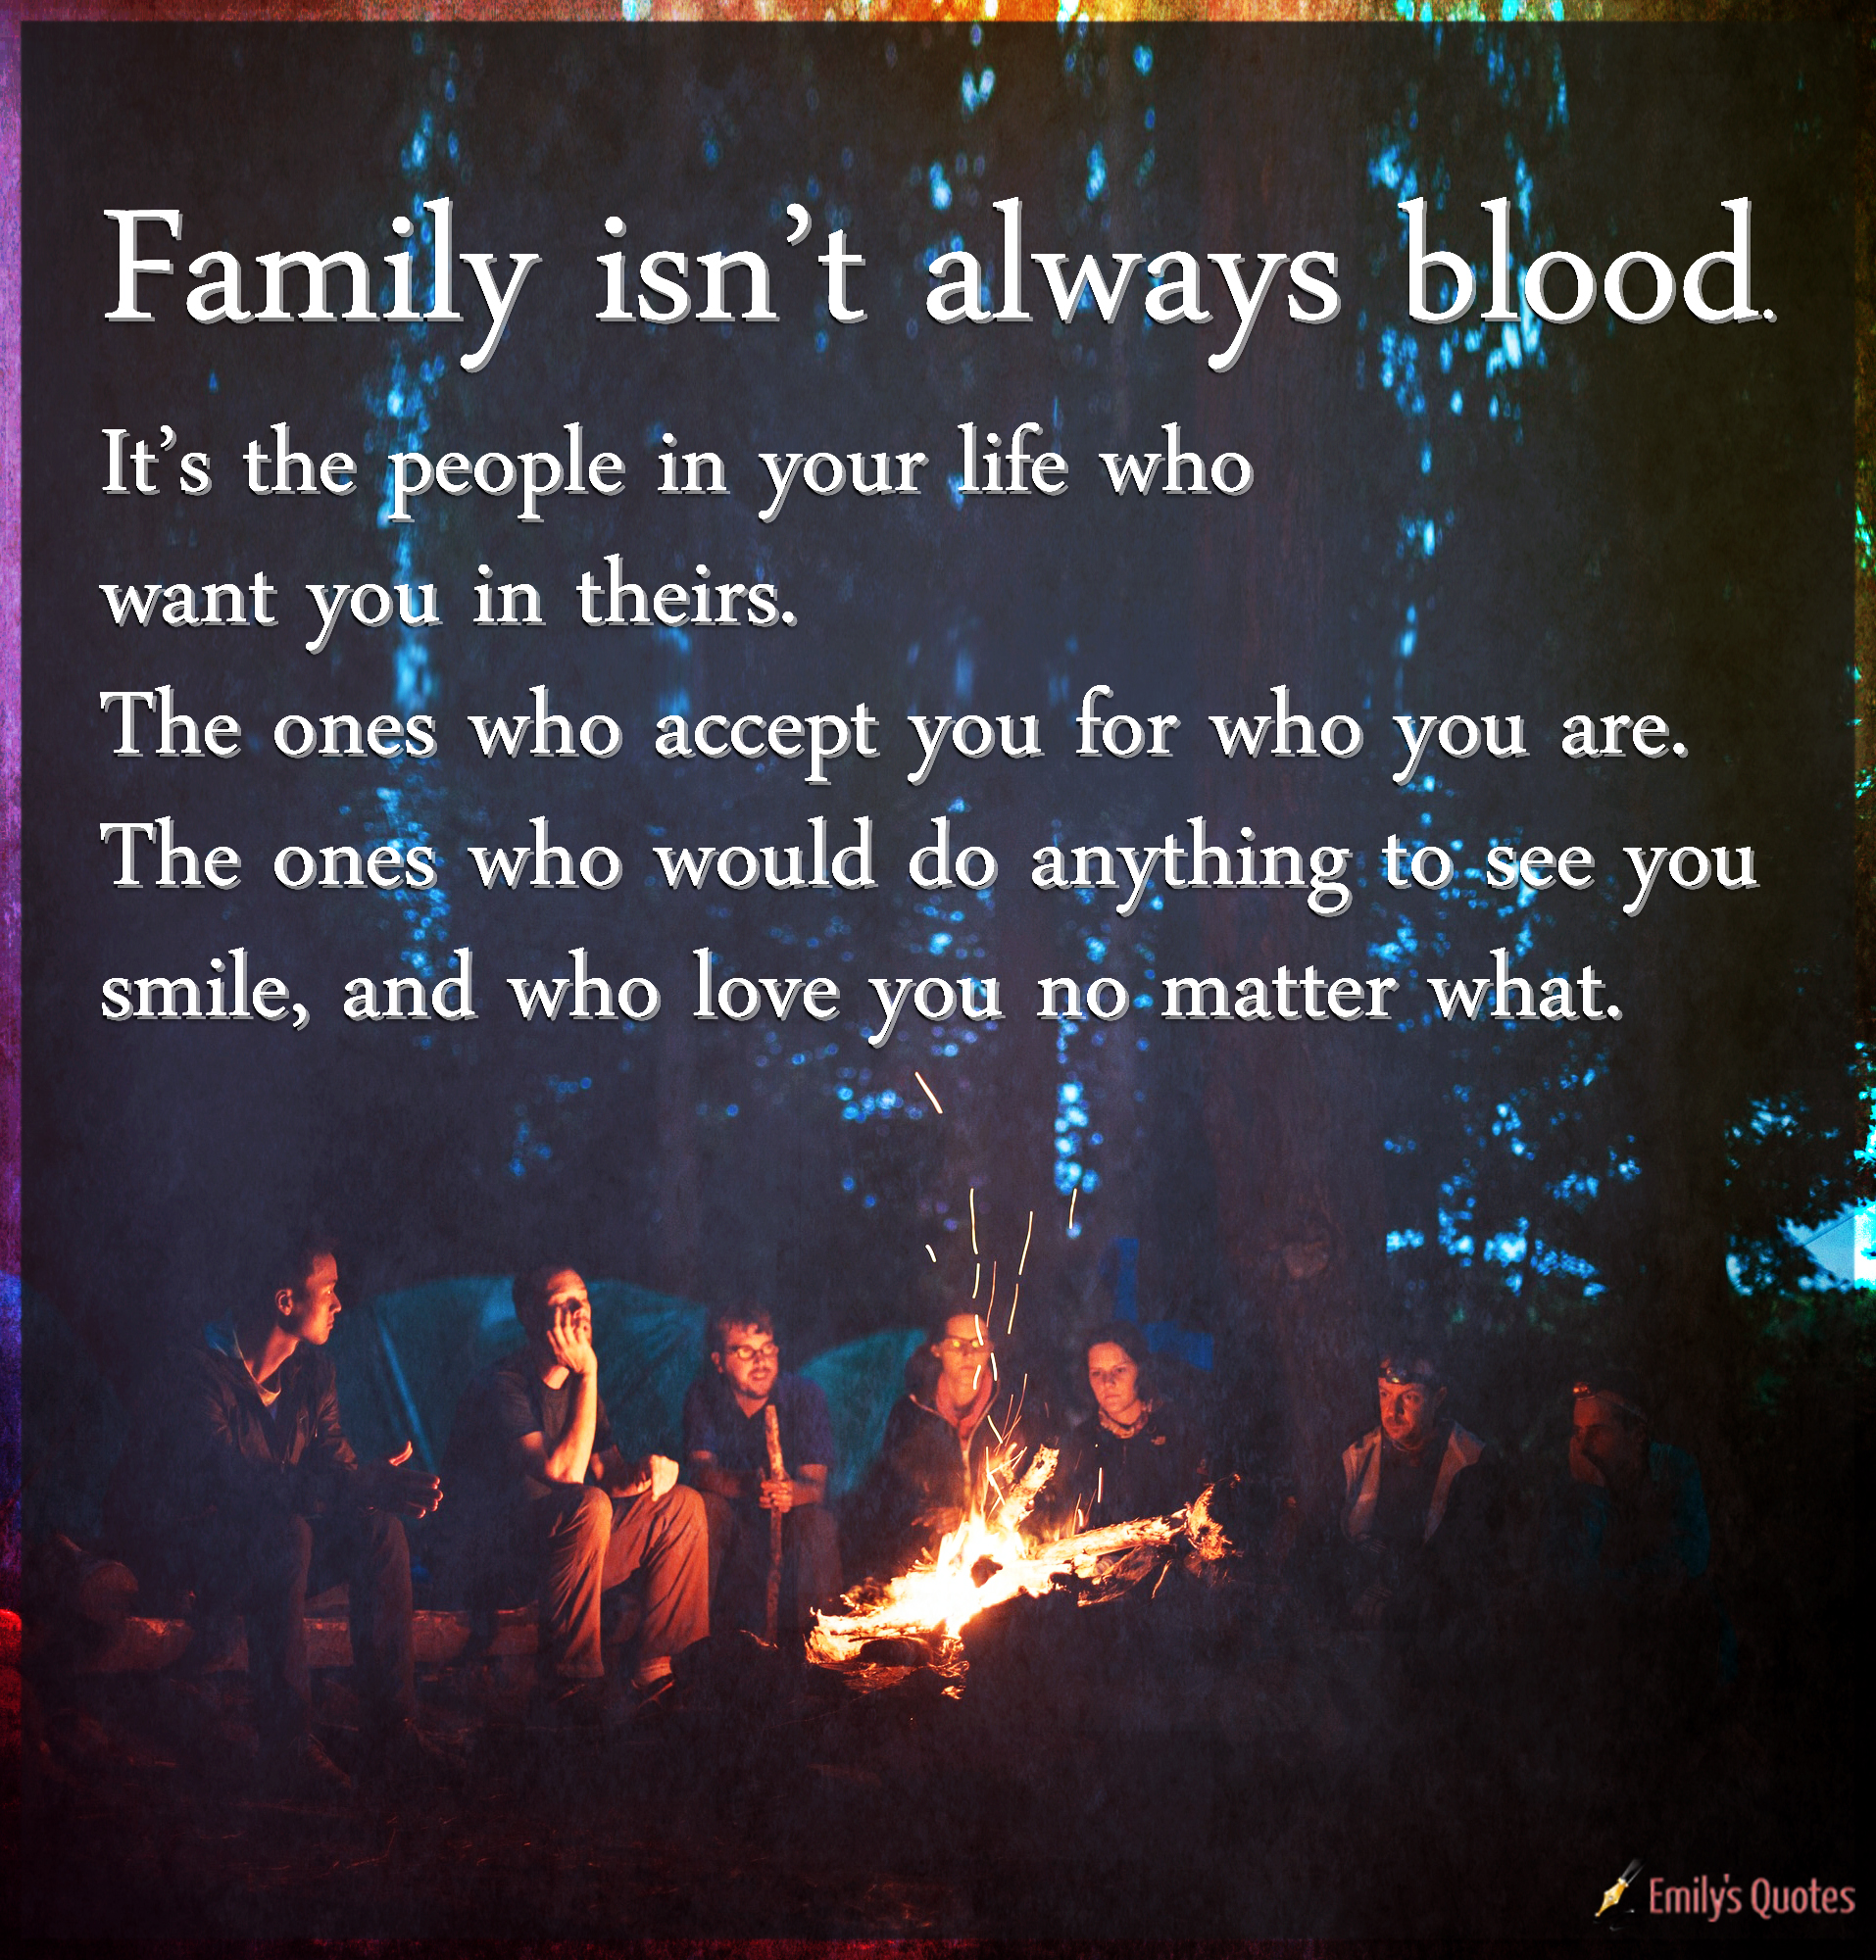 Family isn’t always blood. It’s the people in your life who want you in